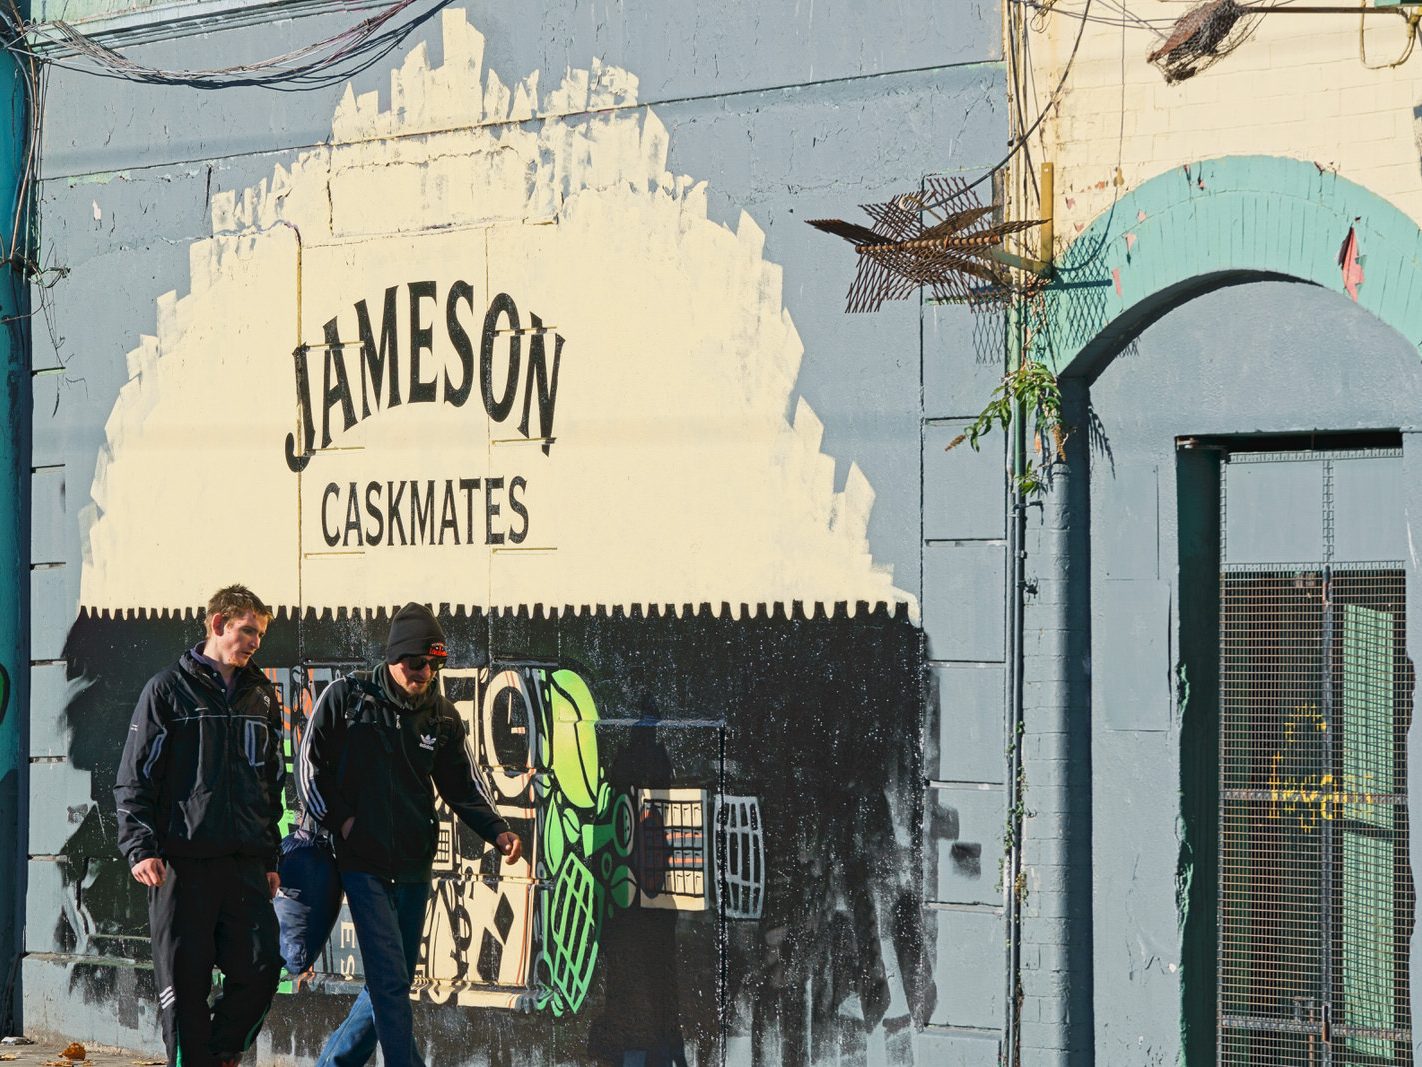 JAMESON CASKMATES THE NEW CONCEPT [COMMERCIAL STREET ART ON CHANCERY STREET]-227391-1